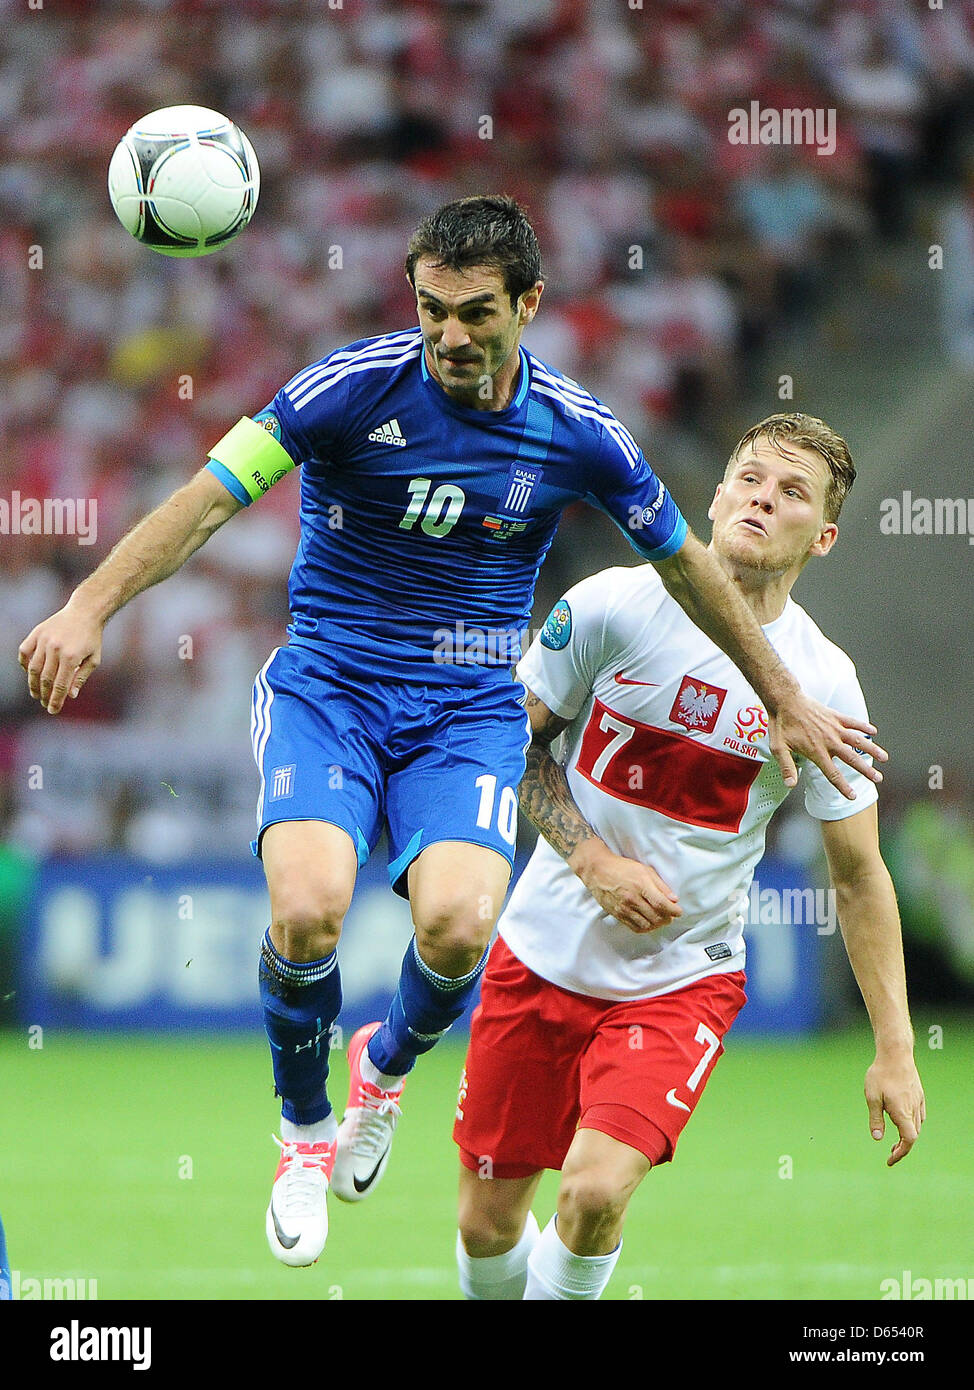 Poland's Eugen Polanski (R) vies for the ball with Greece's Giorgos Karagounis during the UEFA Euro 2012 match between Poland and Greece at the national stadium in Warsaw, Poland, 08 June 2012. Photo: Pressfocus / Revierfoto Stock Photo